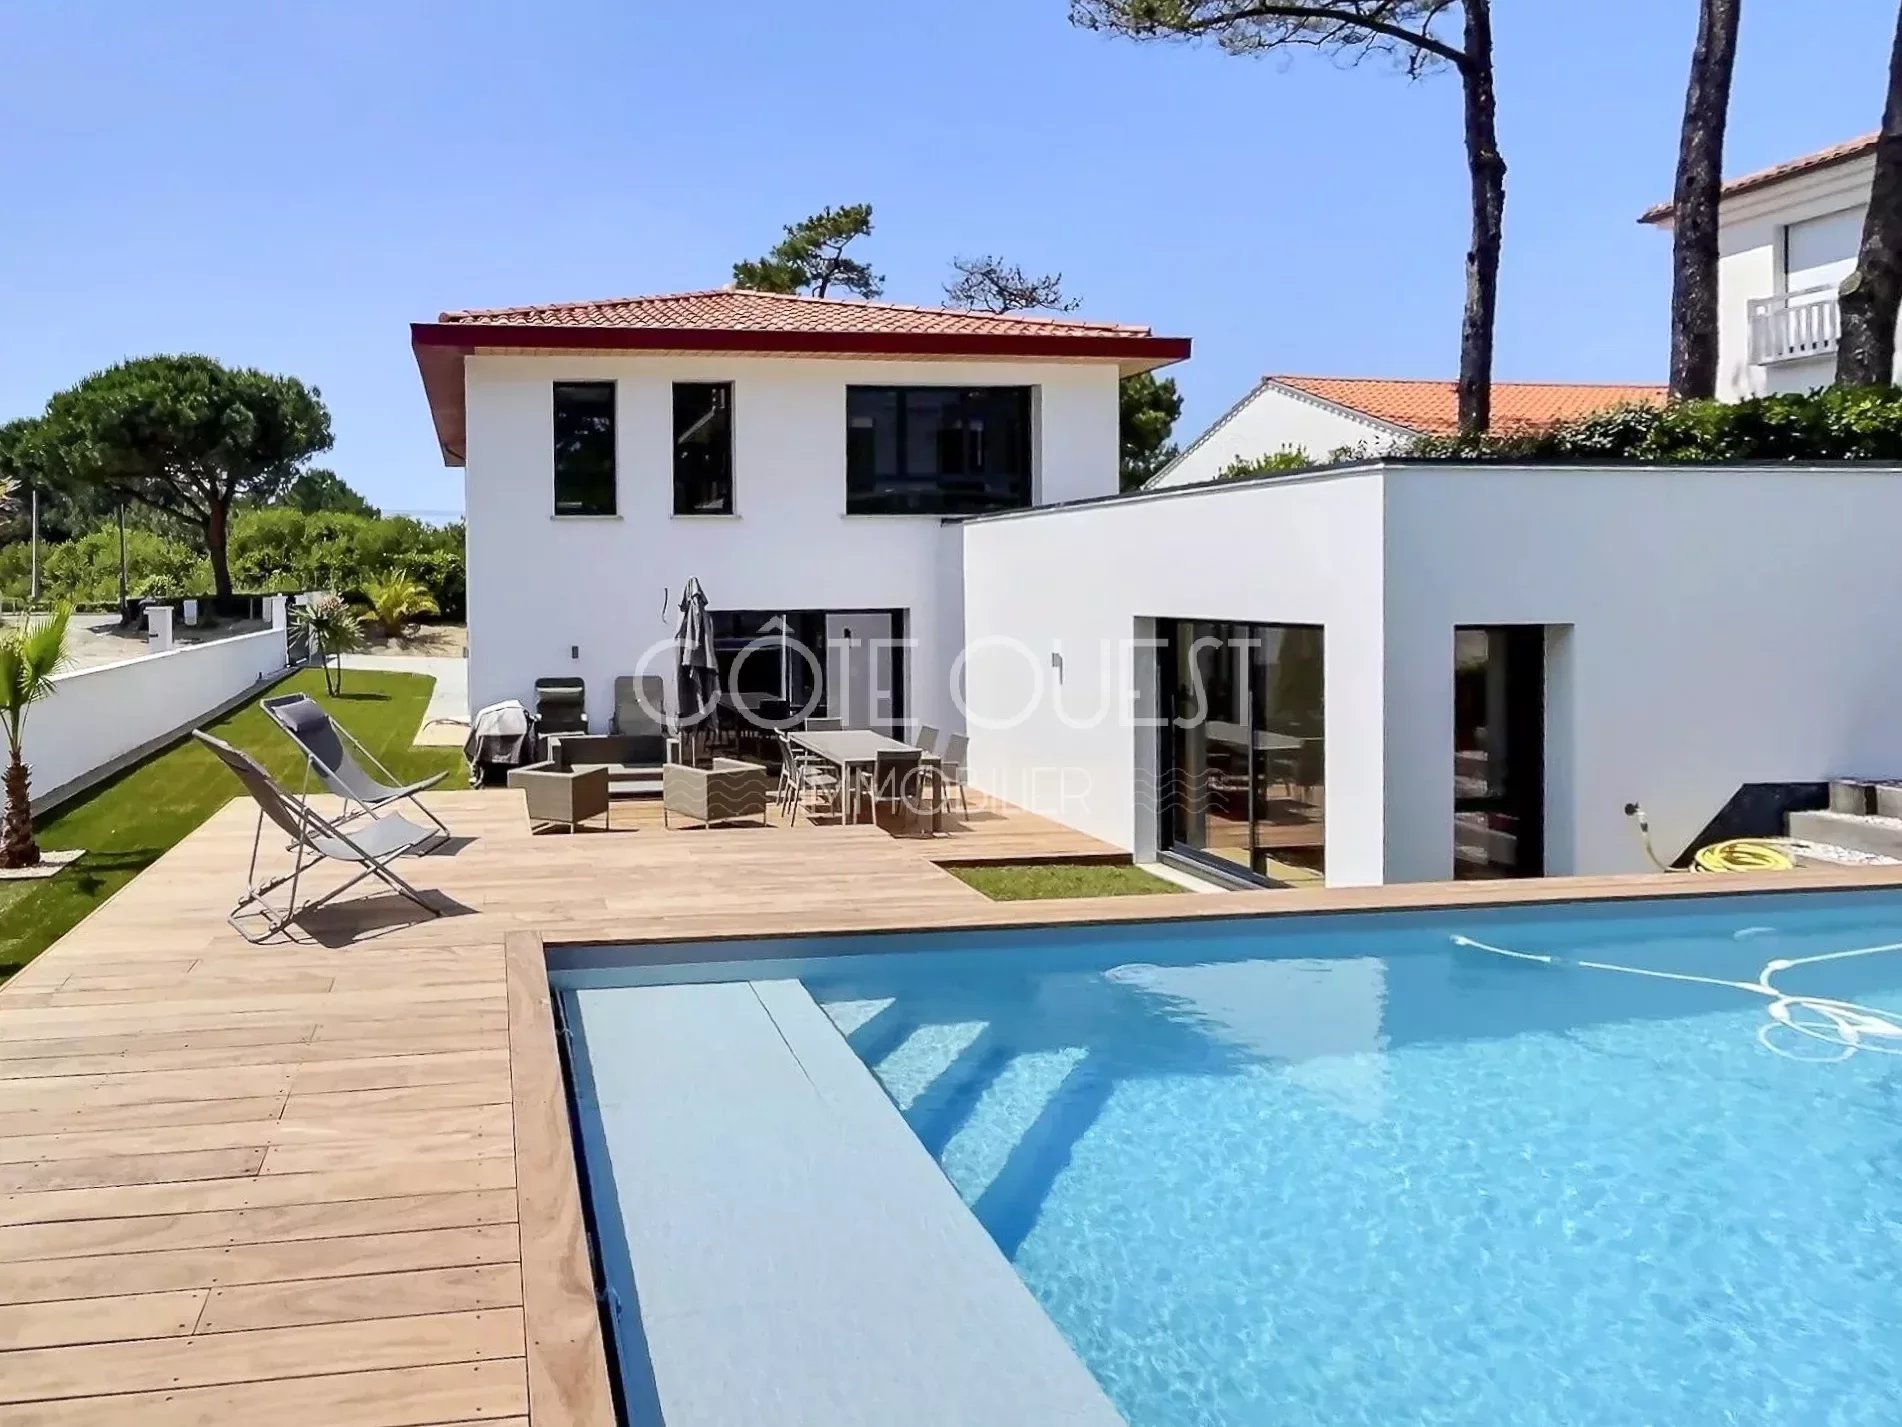 ANGLET – A NEW PROPERTY WITH A SWIMMING POOL